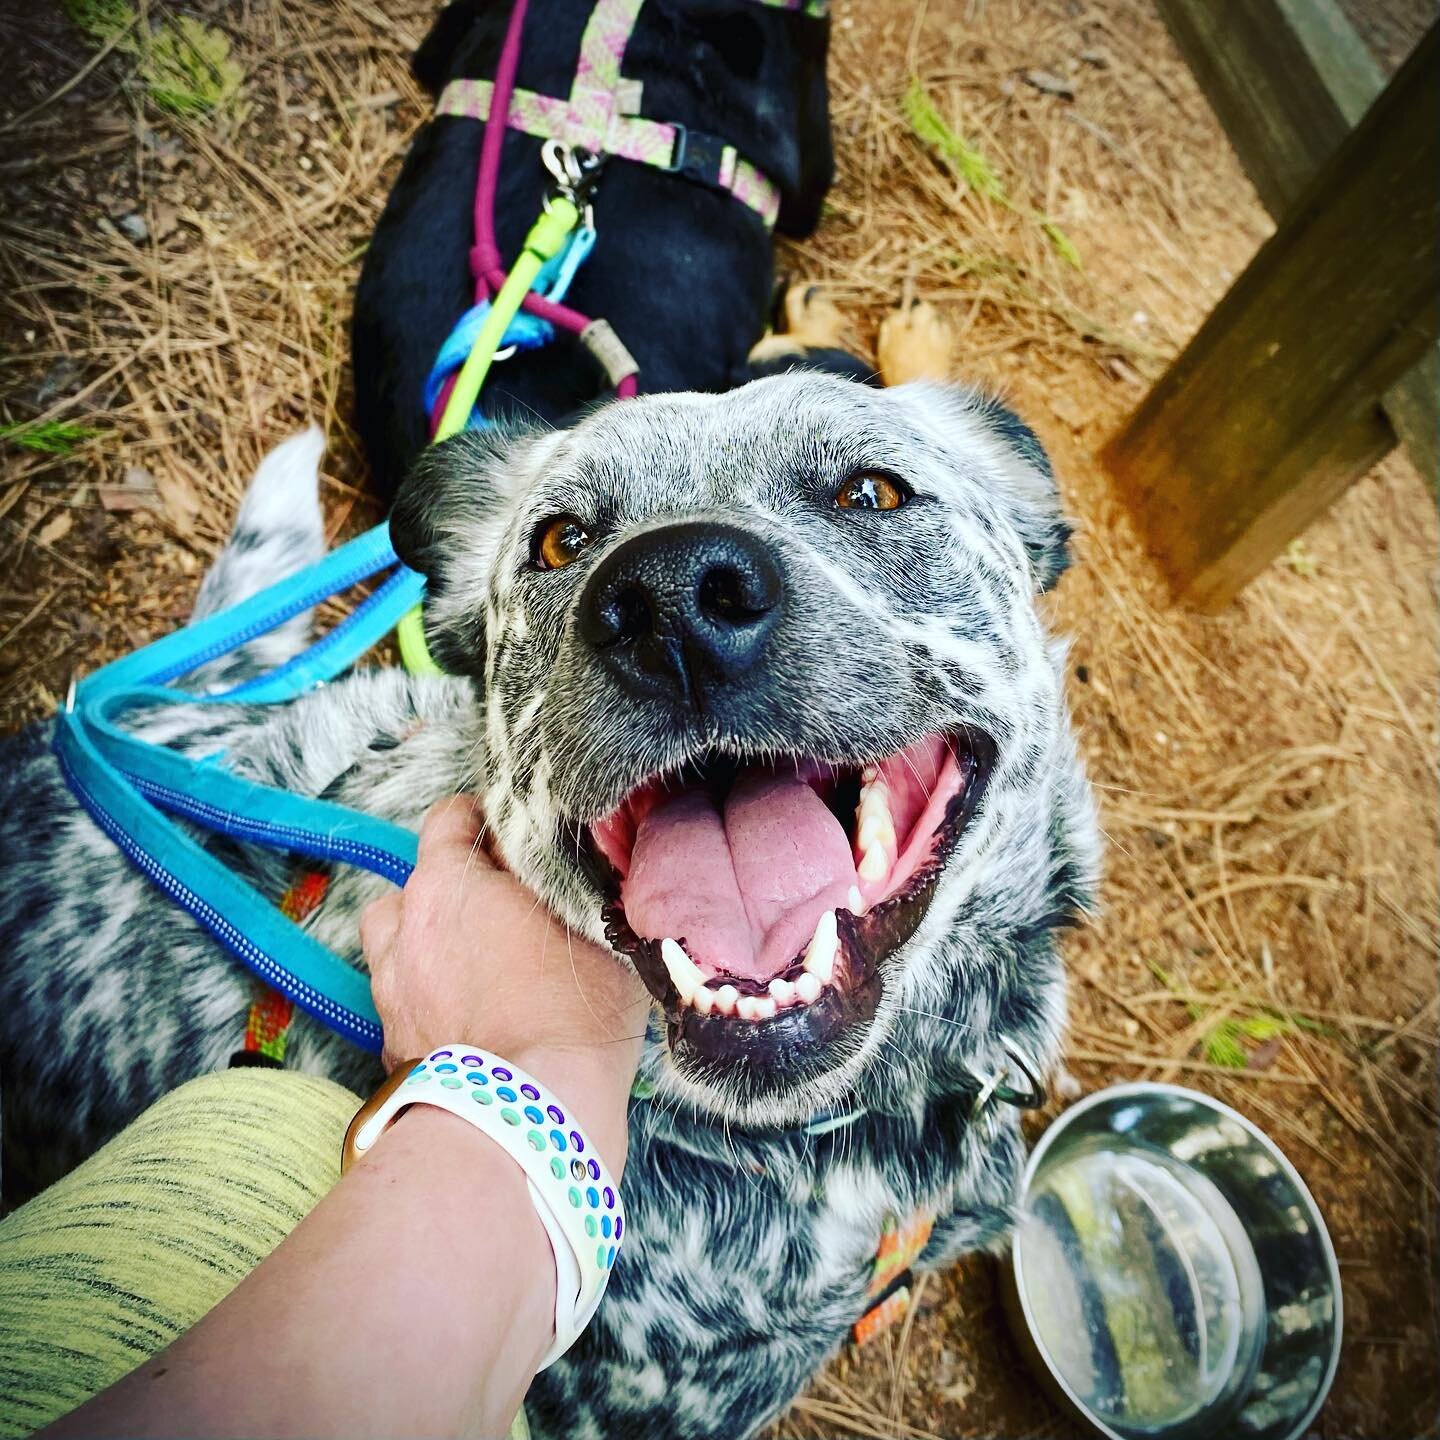 For anyone who&rsquo;s ever wondered if dogs really smile, I present Delphie. And for anyone who&rsquo;s ever wondered what it&rsquo;s like to stare into the face of the sun, I also present Delphie. 🐶☀️😁

#rescuedogsofinstagram #deafdogsrock